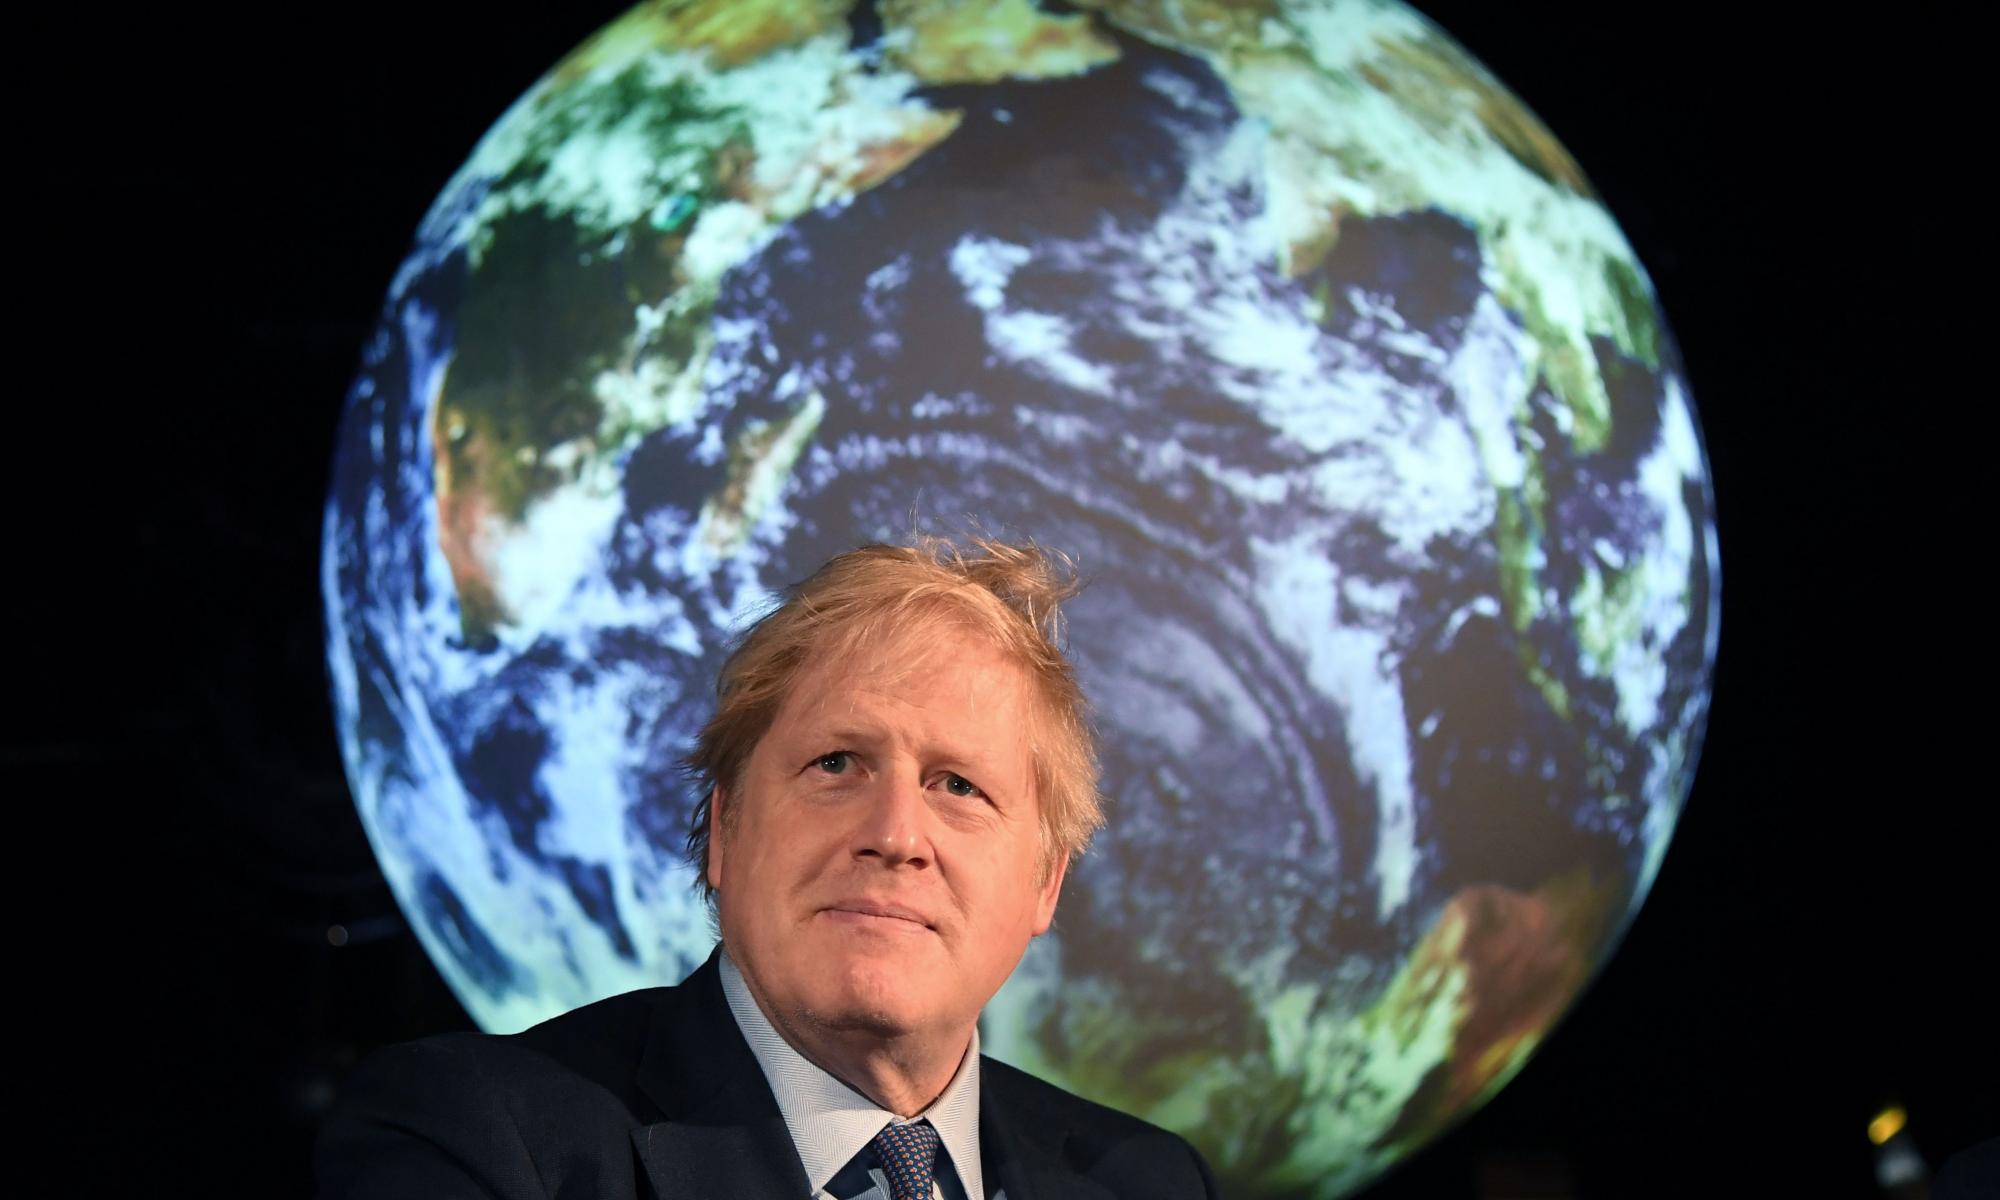 Can Boris Johnson be trusted to act on the climate crisis?